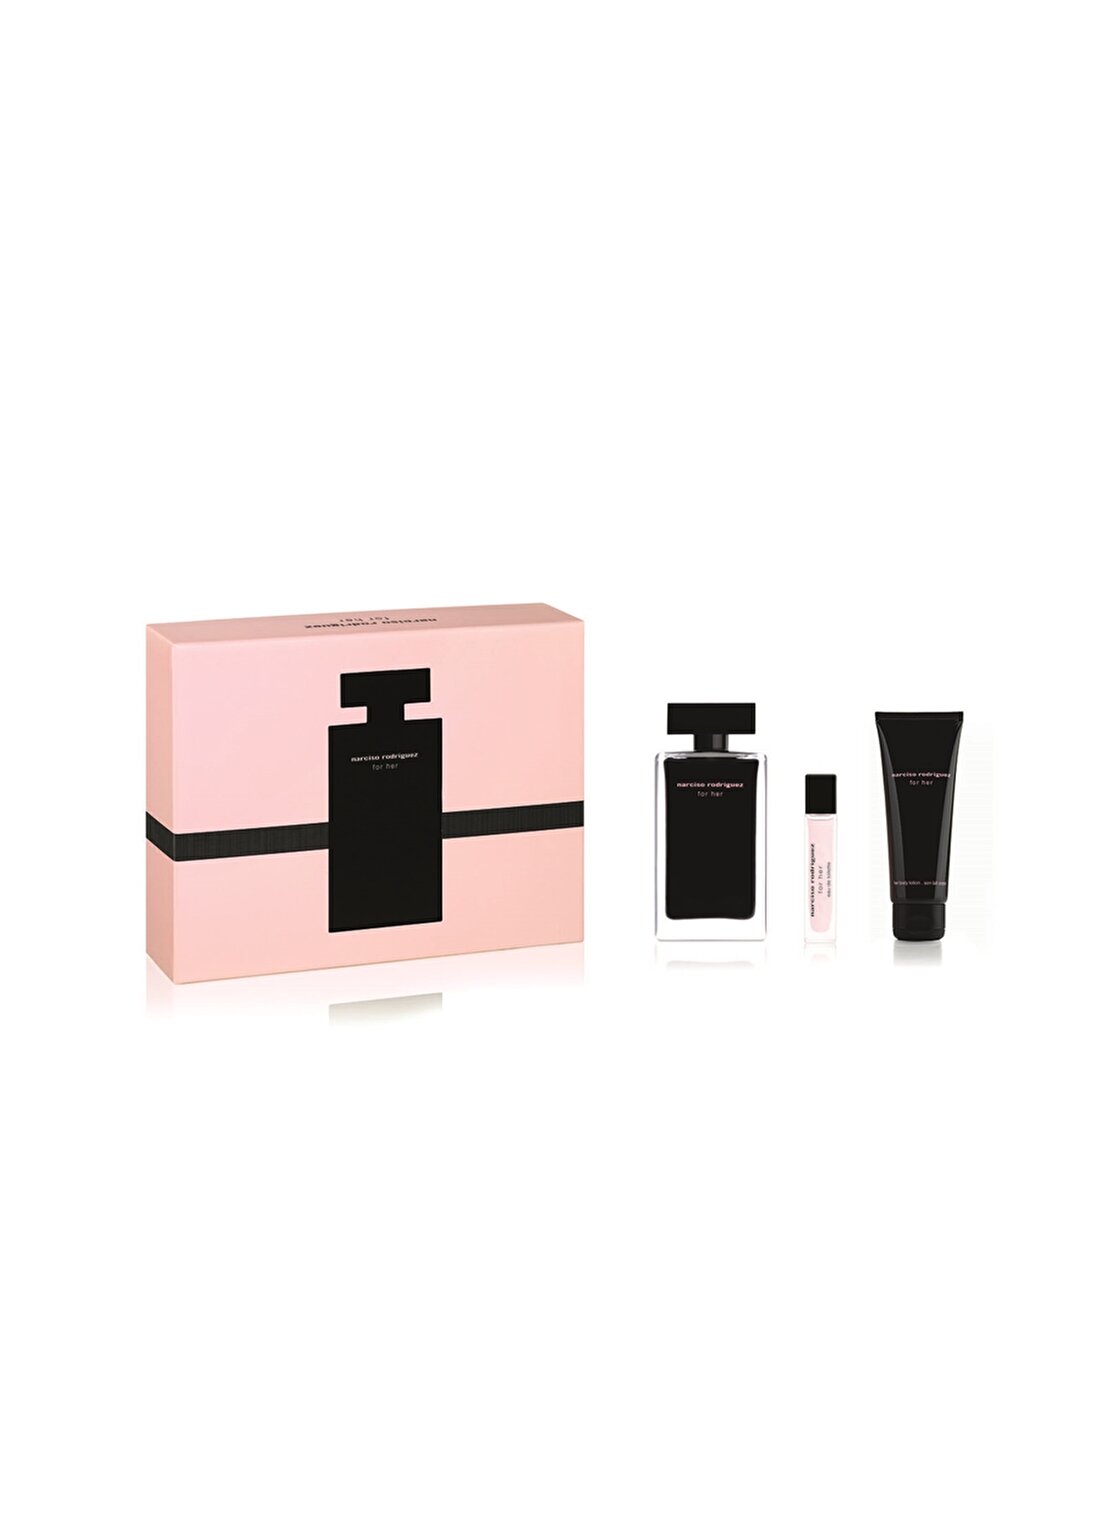 Narciso Rodriguez For Her Edt 100 Ml + Body Lotion 75 Ml + For Her Edt 10 Ml Parfüm Set